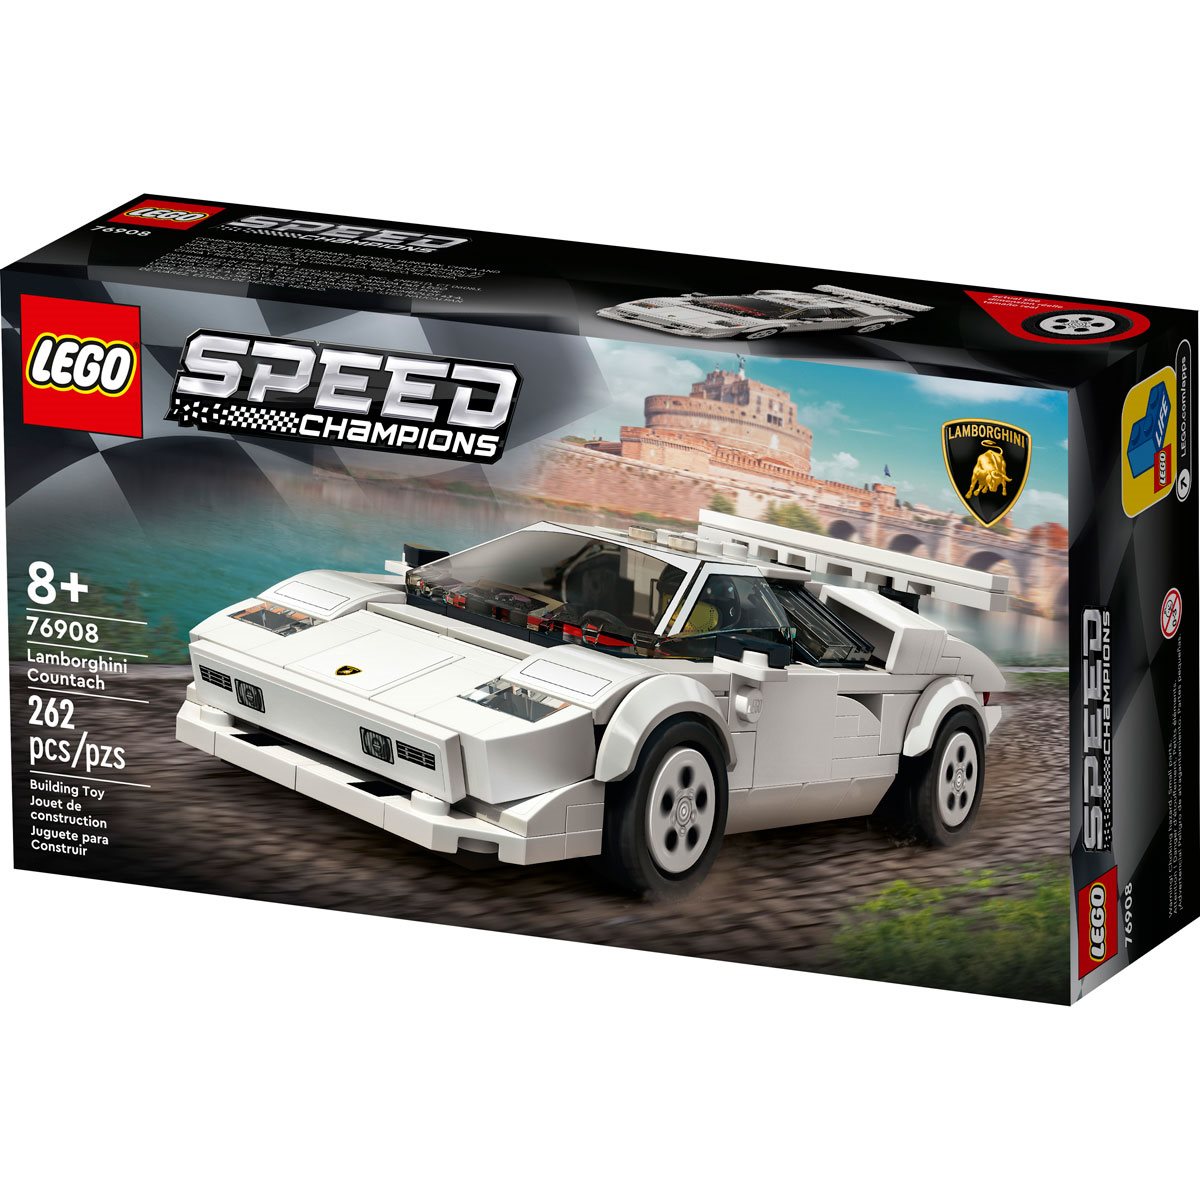 LEGO Speed Champions Countach